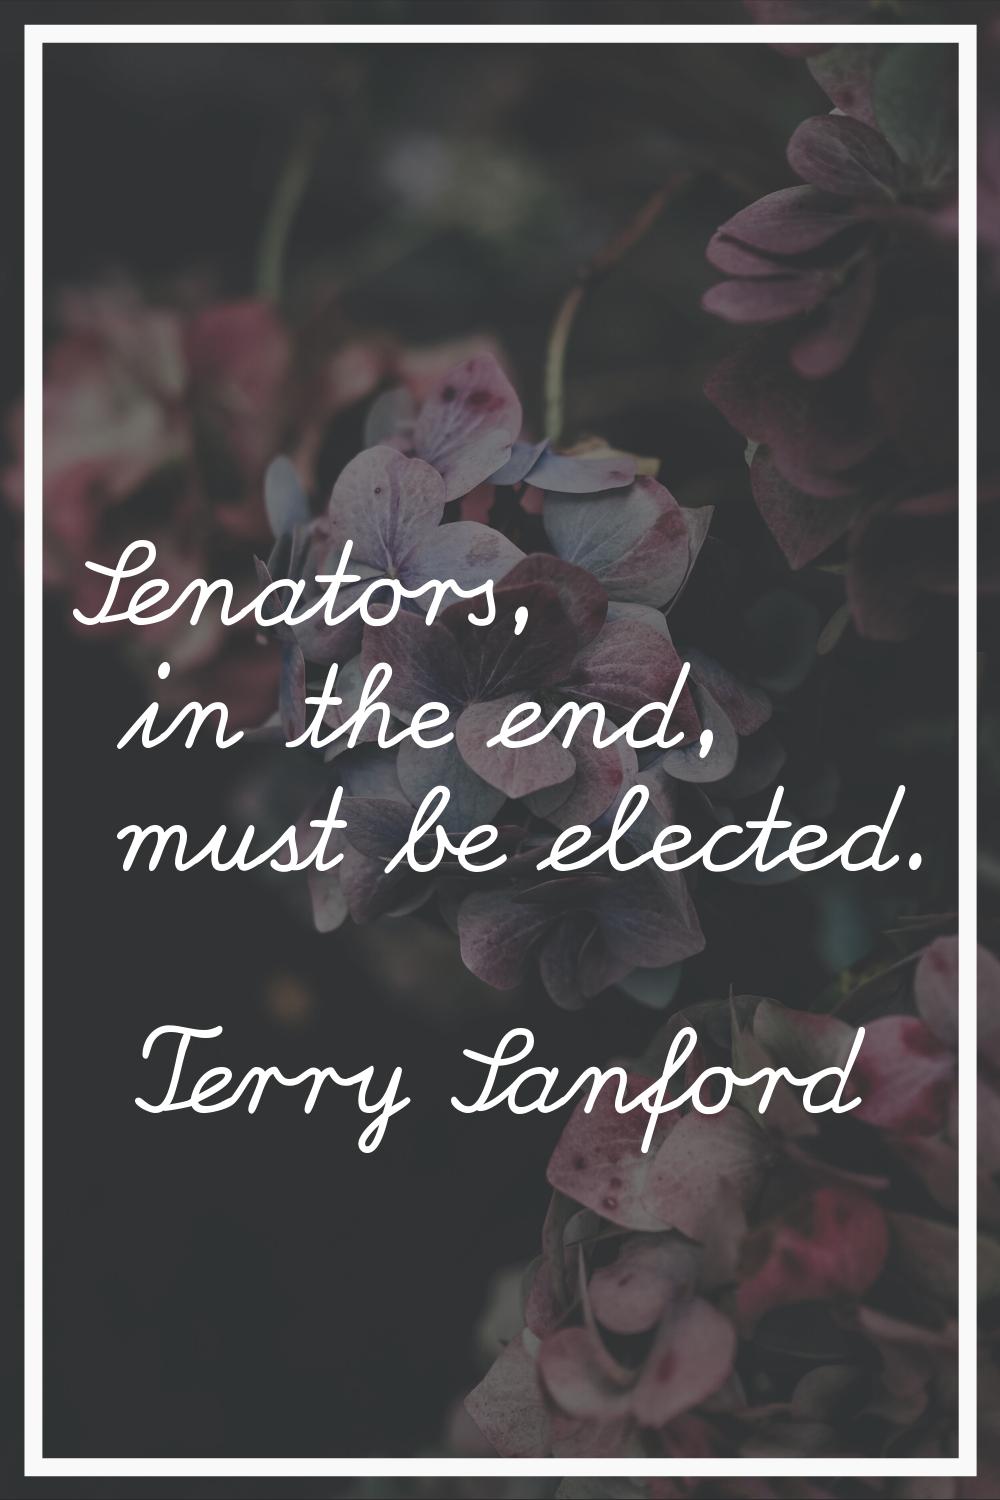 Senators, in the end, must be elected.